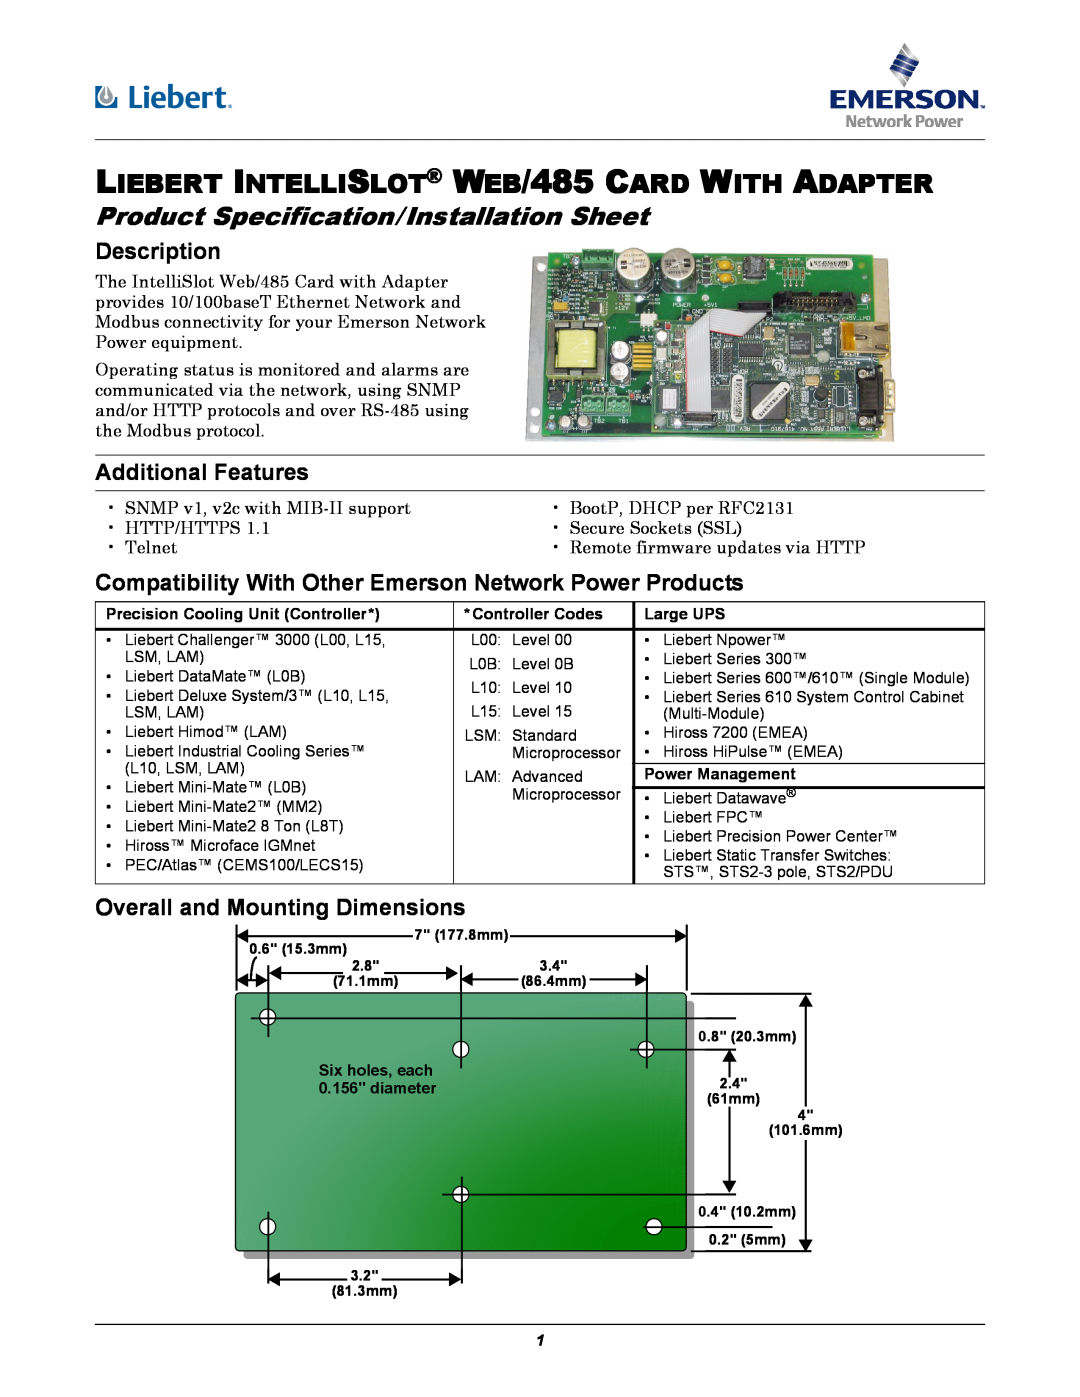 Emerson WEB/485 quick start Liebert IntelliSlot Web/485 Card With Adapter, Quick Start Guide, Install, Connect The Cable 